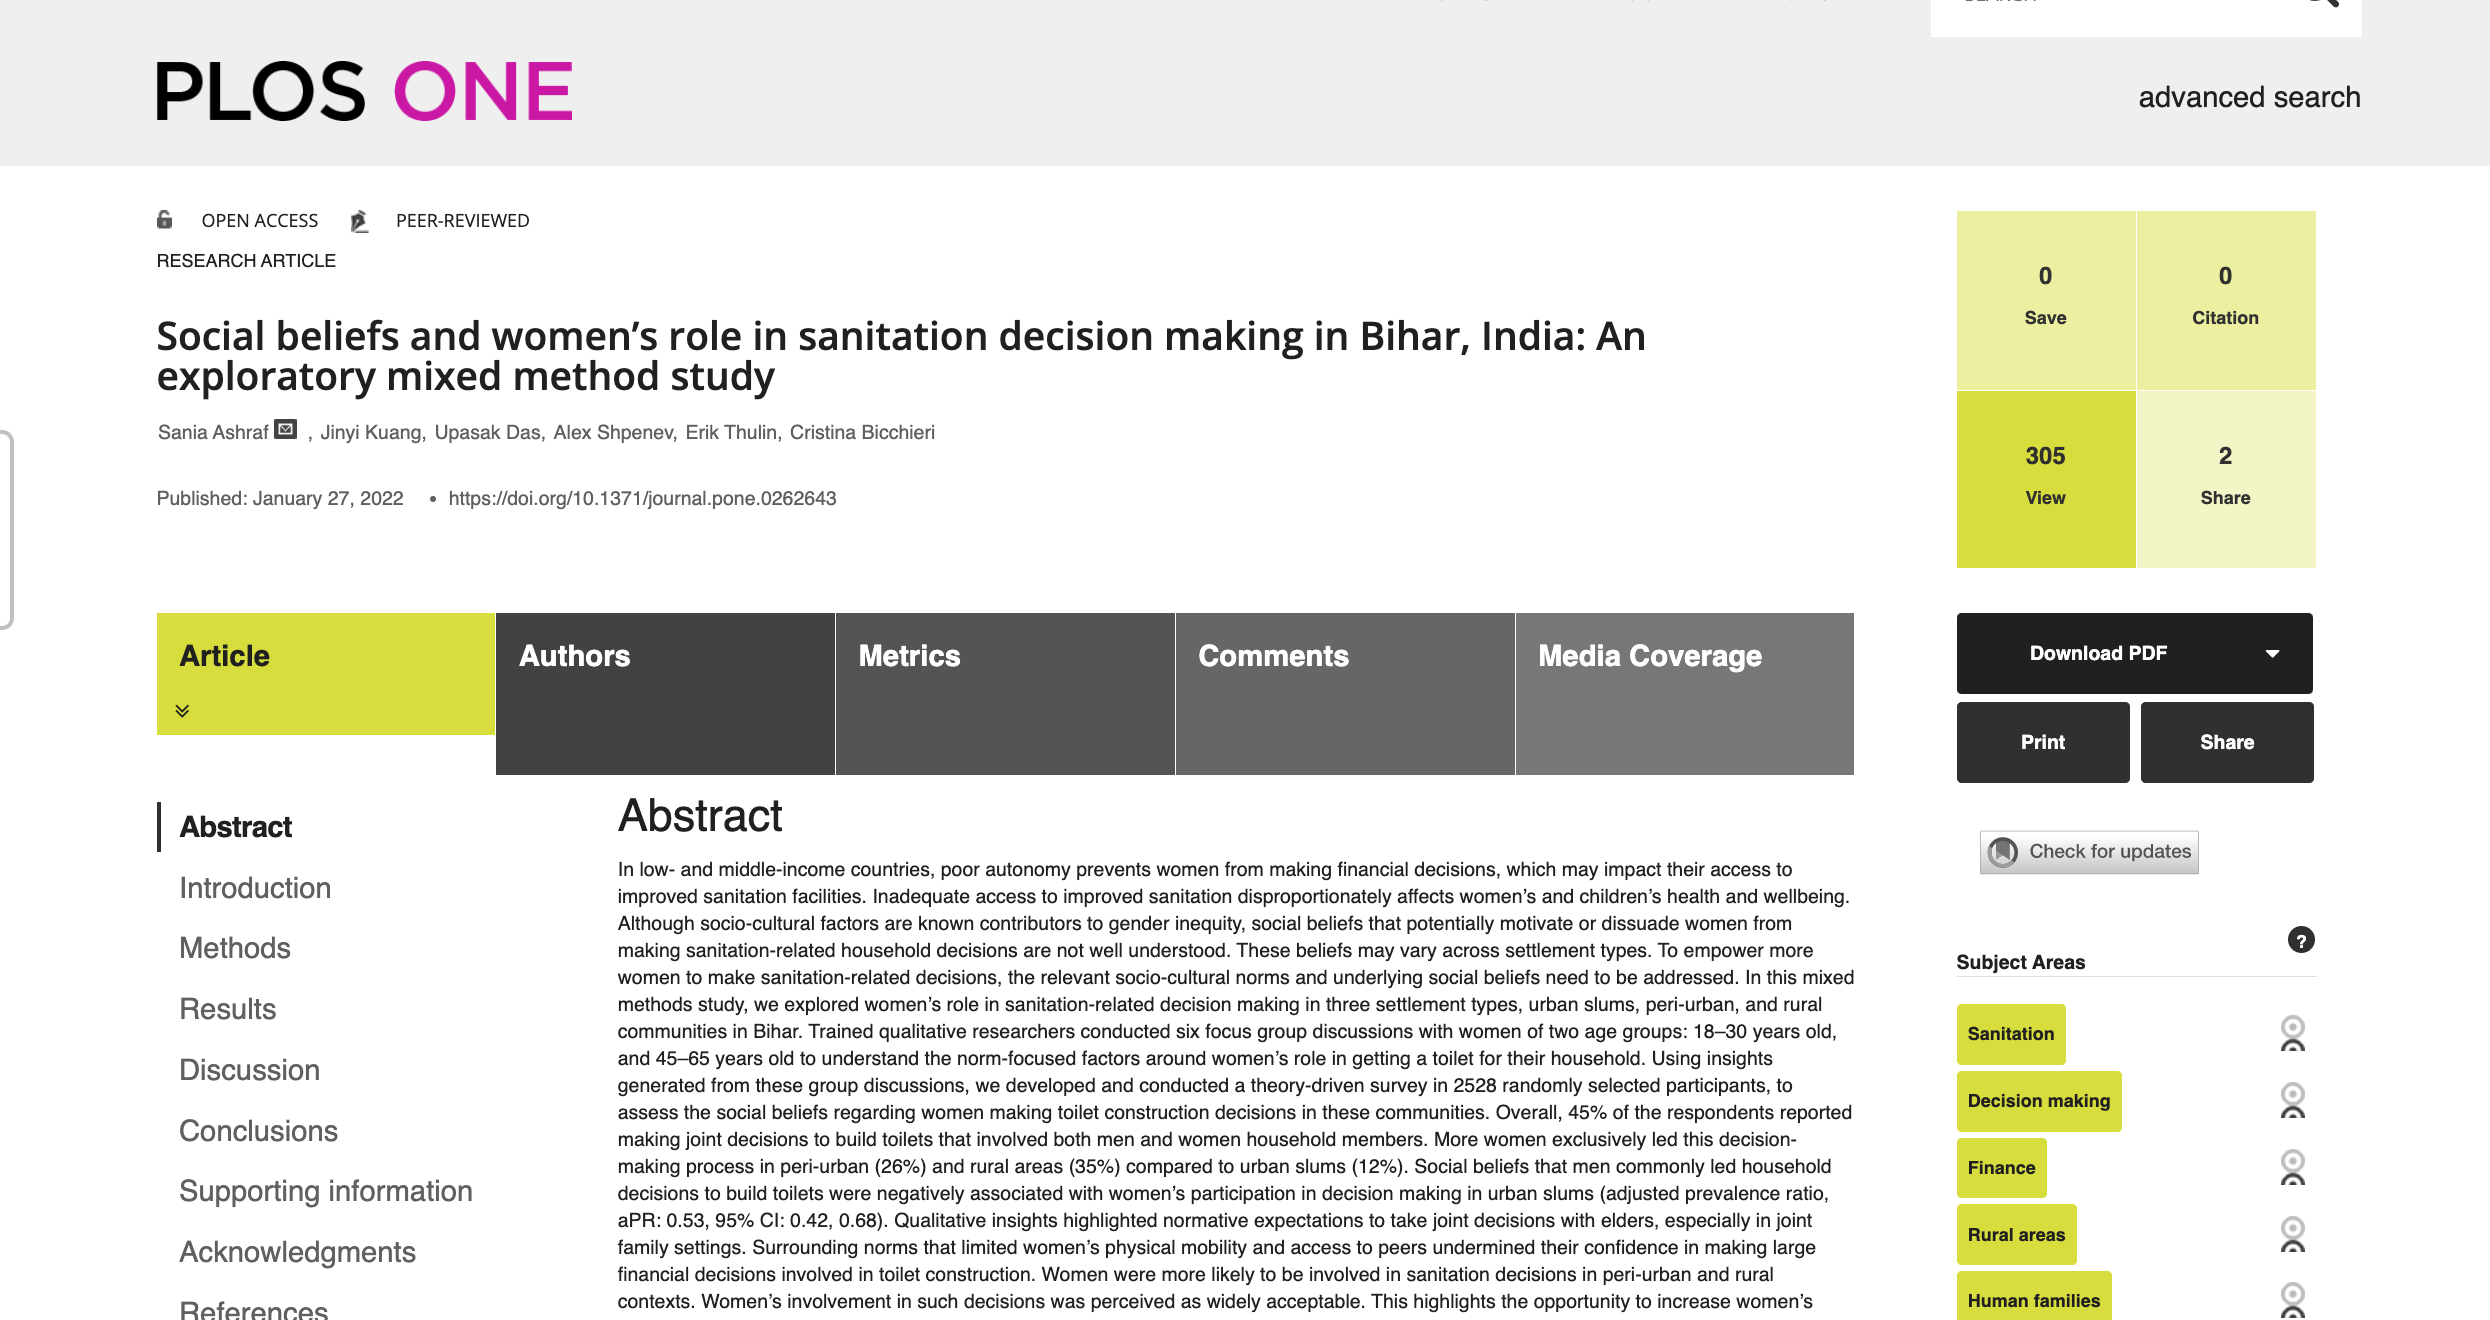 Social beliefs and women’s role in sanitation decision making in Bihar, India: An exploratory mixed method study